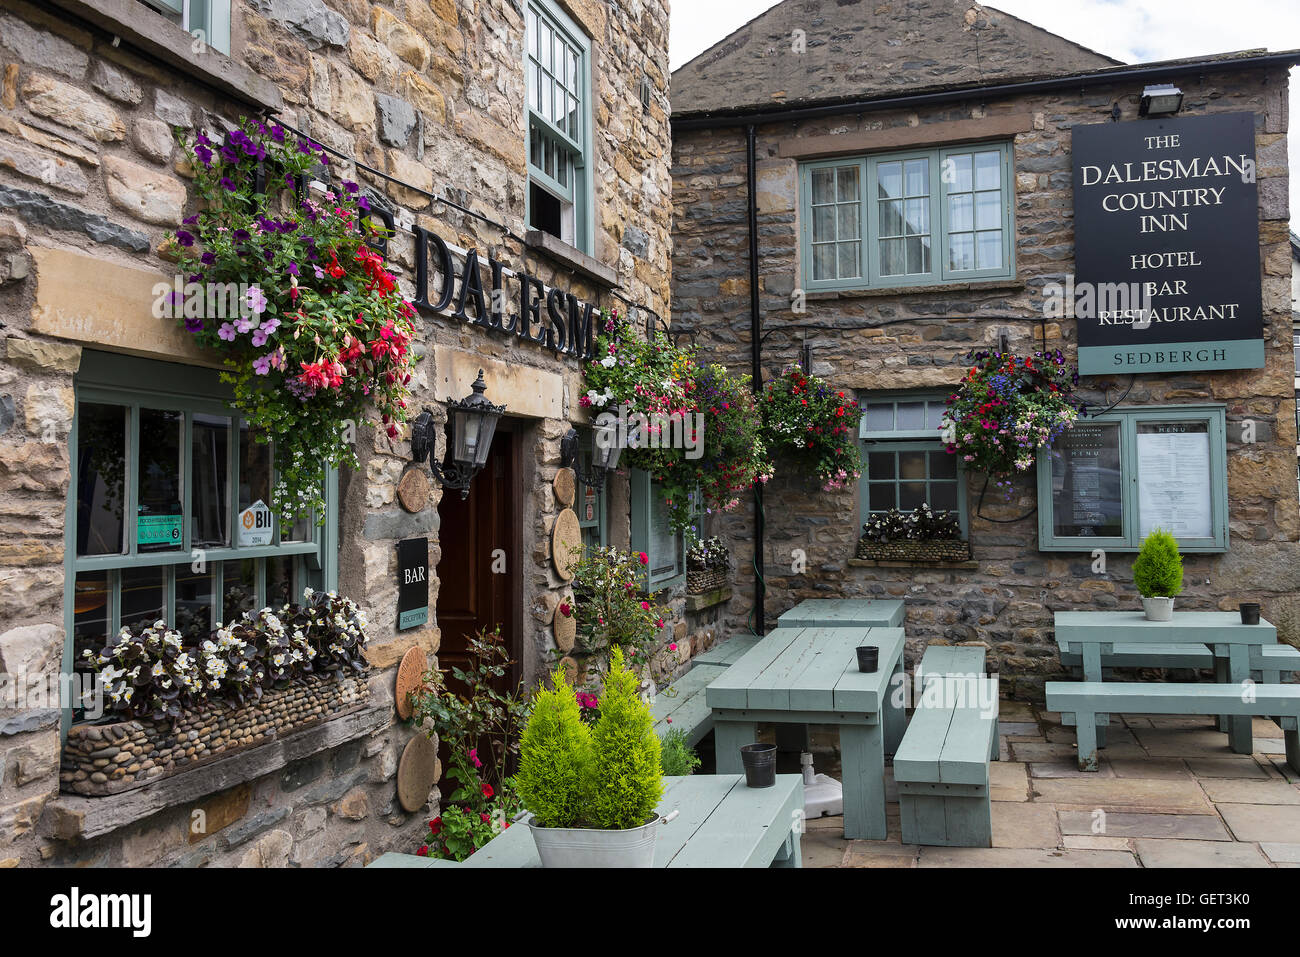 The Beautiful Dalesman Country Inn, Hotel, Bar and Restaurant in Sedbergh Cumbria, Yorkshire Dales England United Kingdom UK Stock Photo